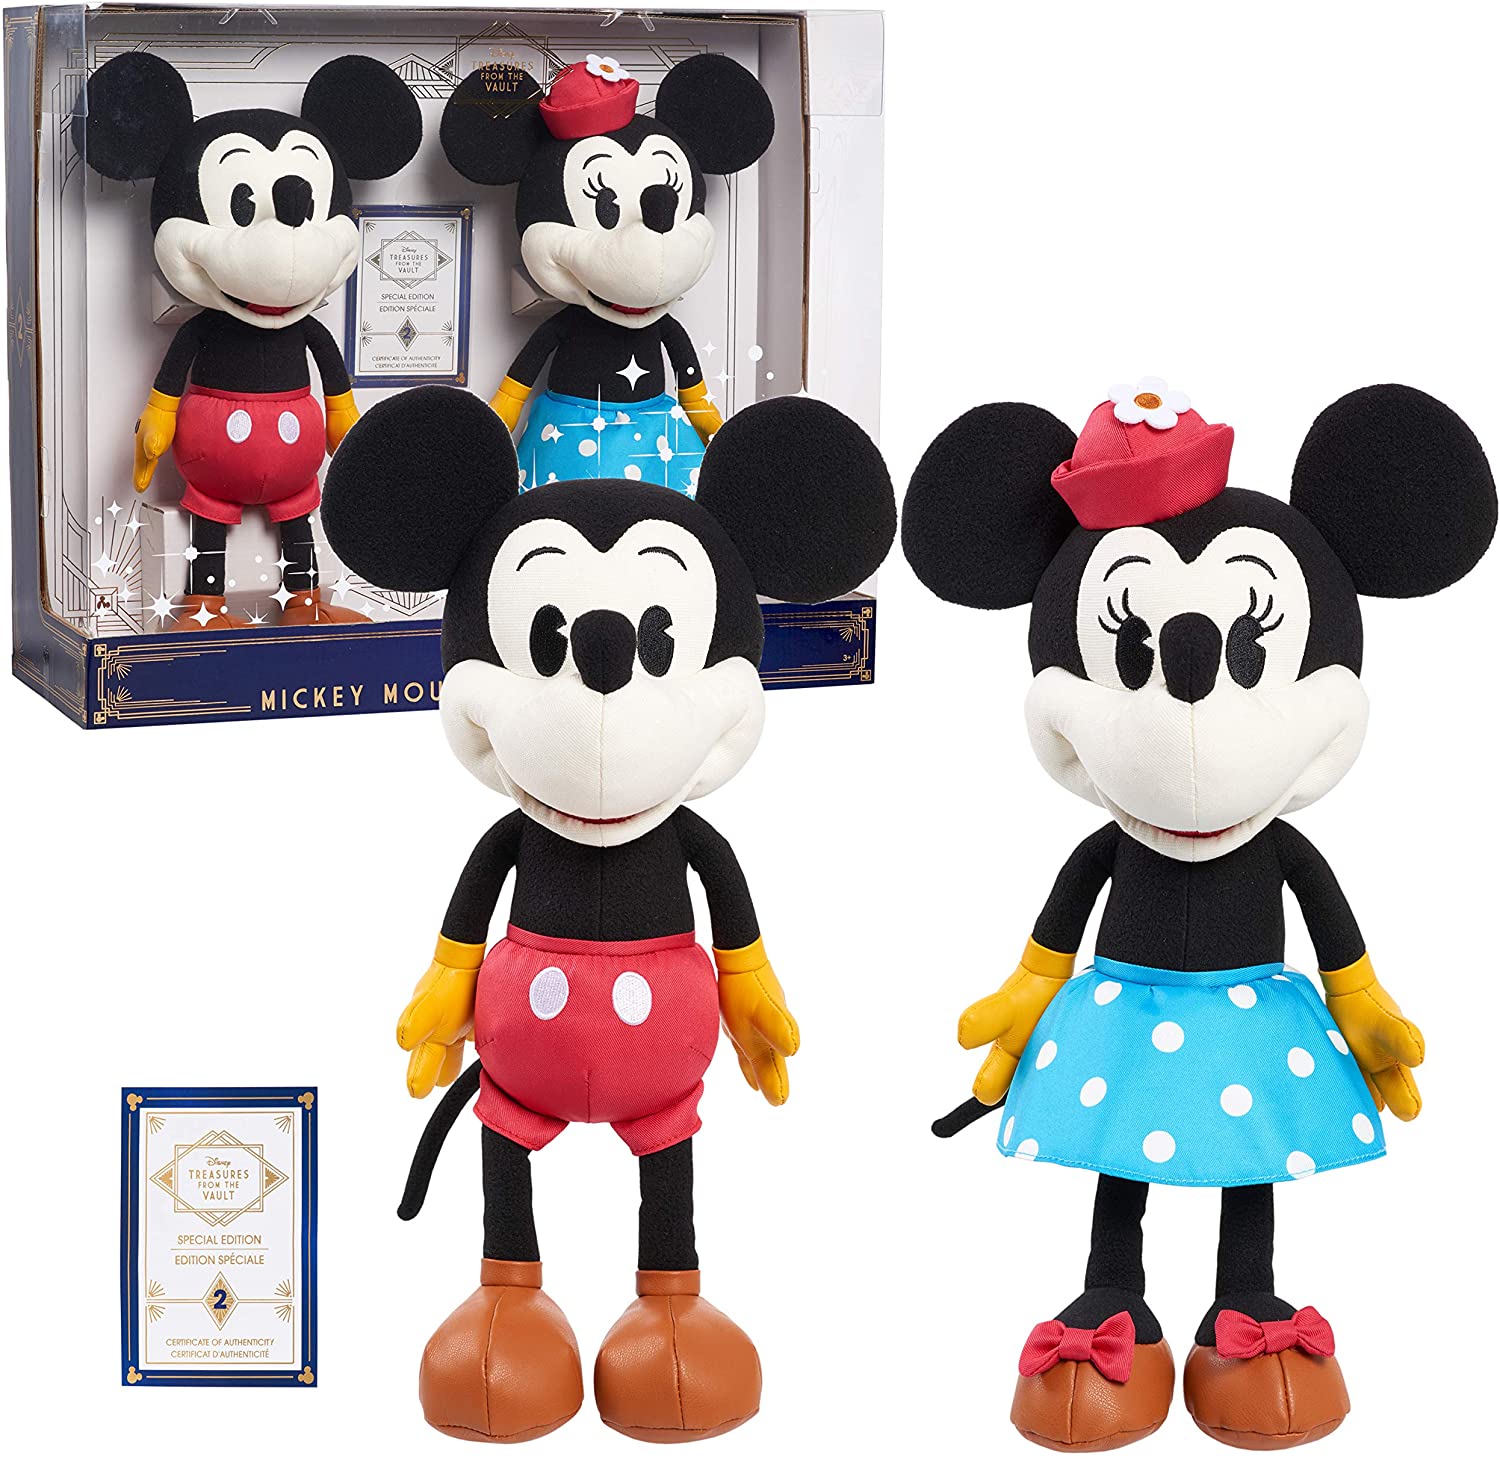 https://allears.net/wp-content/uploads/2021/06/2021-Amazon-Prime-Day-Disney-Treasures-from-the-vault-mickey-and-minnie-mouse-plush.jpg